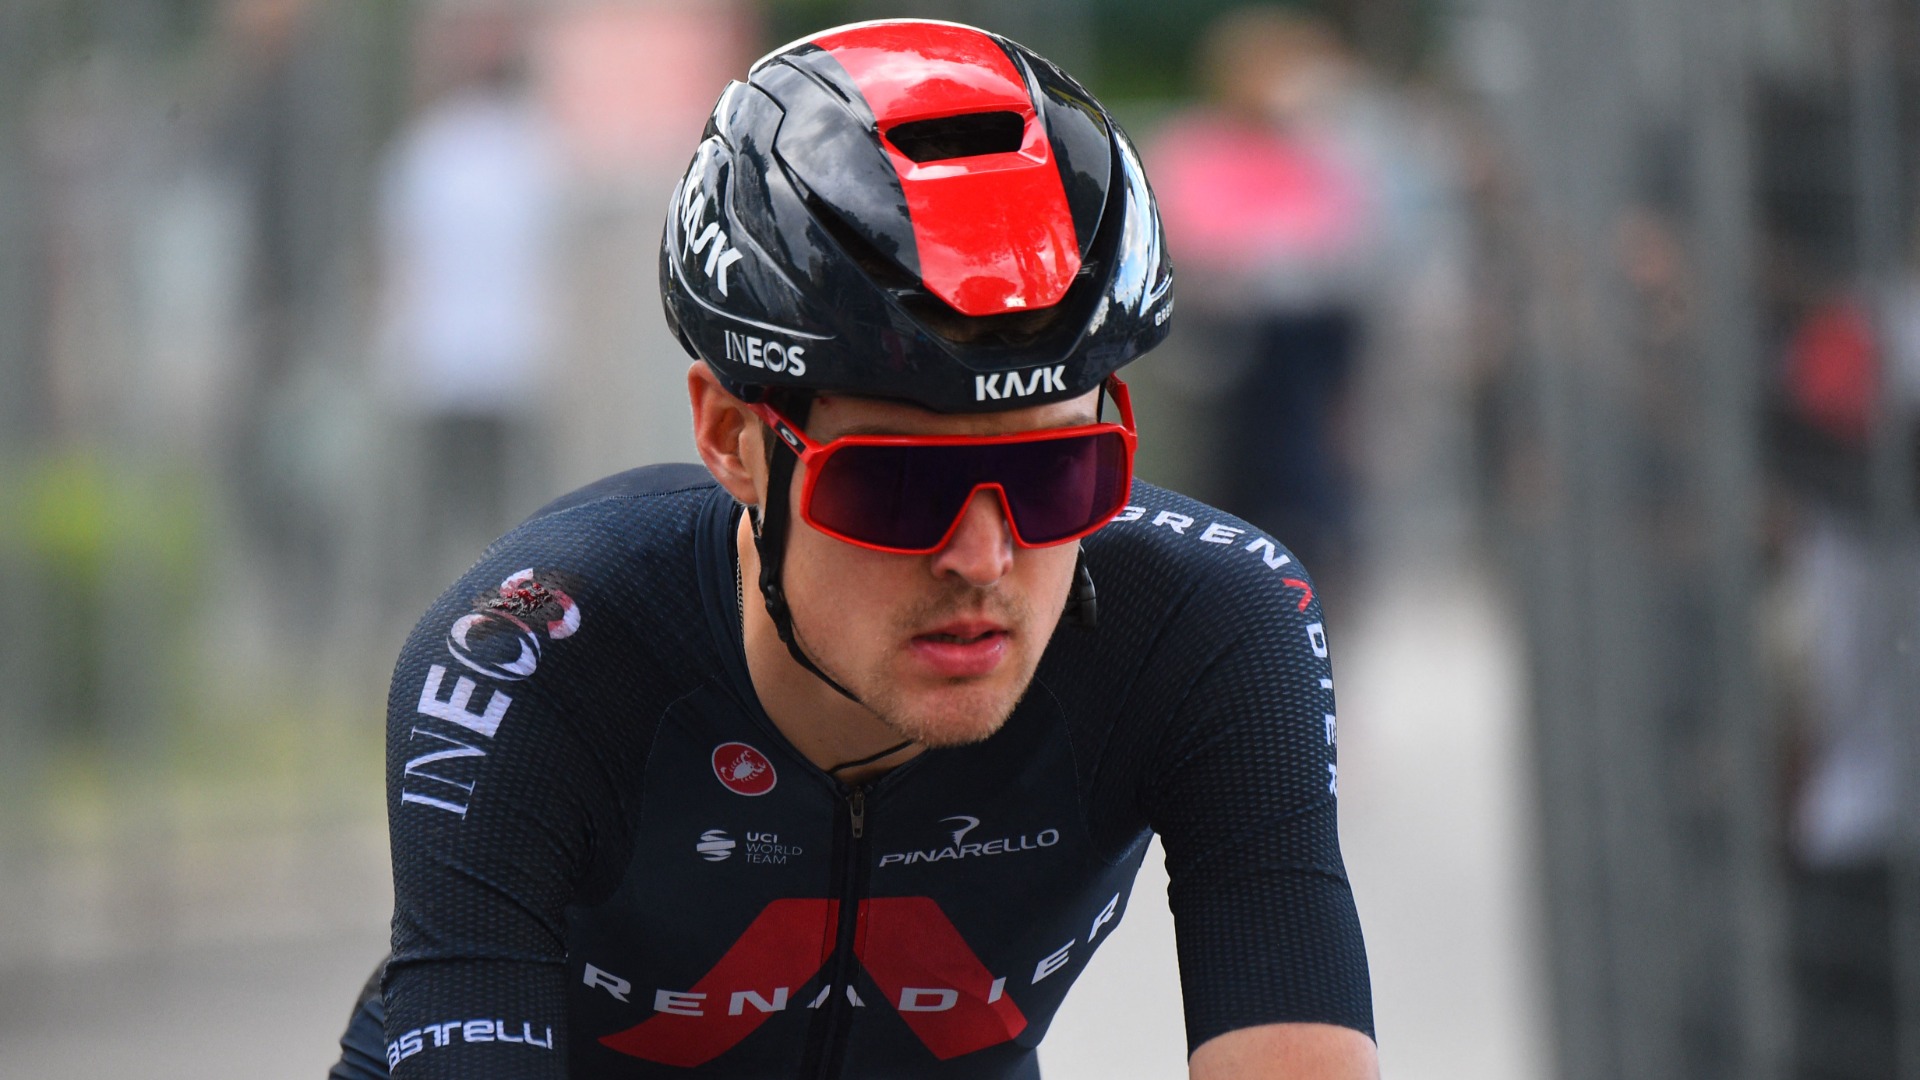 Ineos Grenadiers joint team leader Pavel Sivakov is out of the Giro d'Italia following a heavy crash on Wednesday.